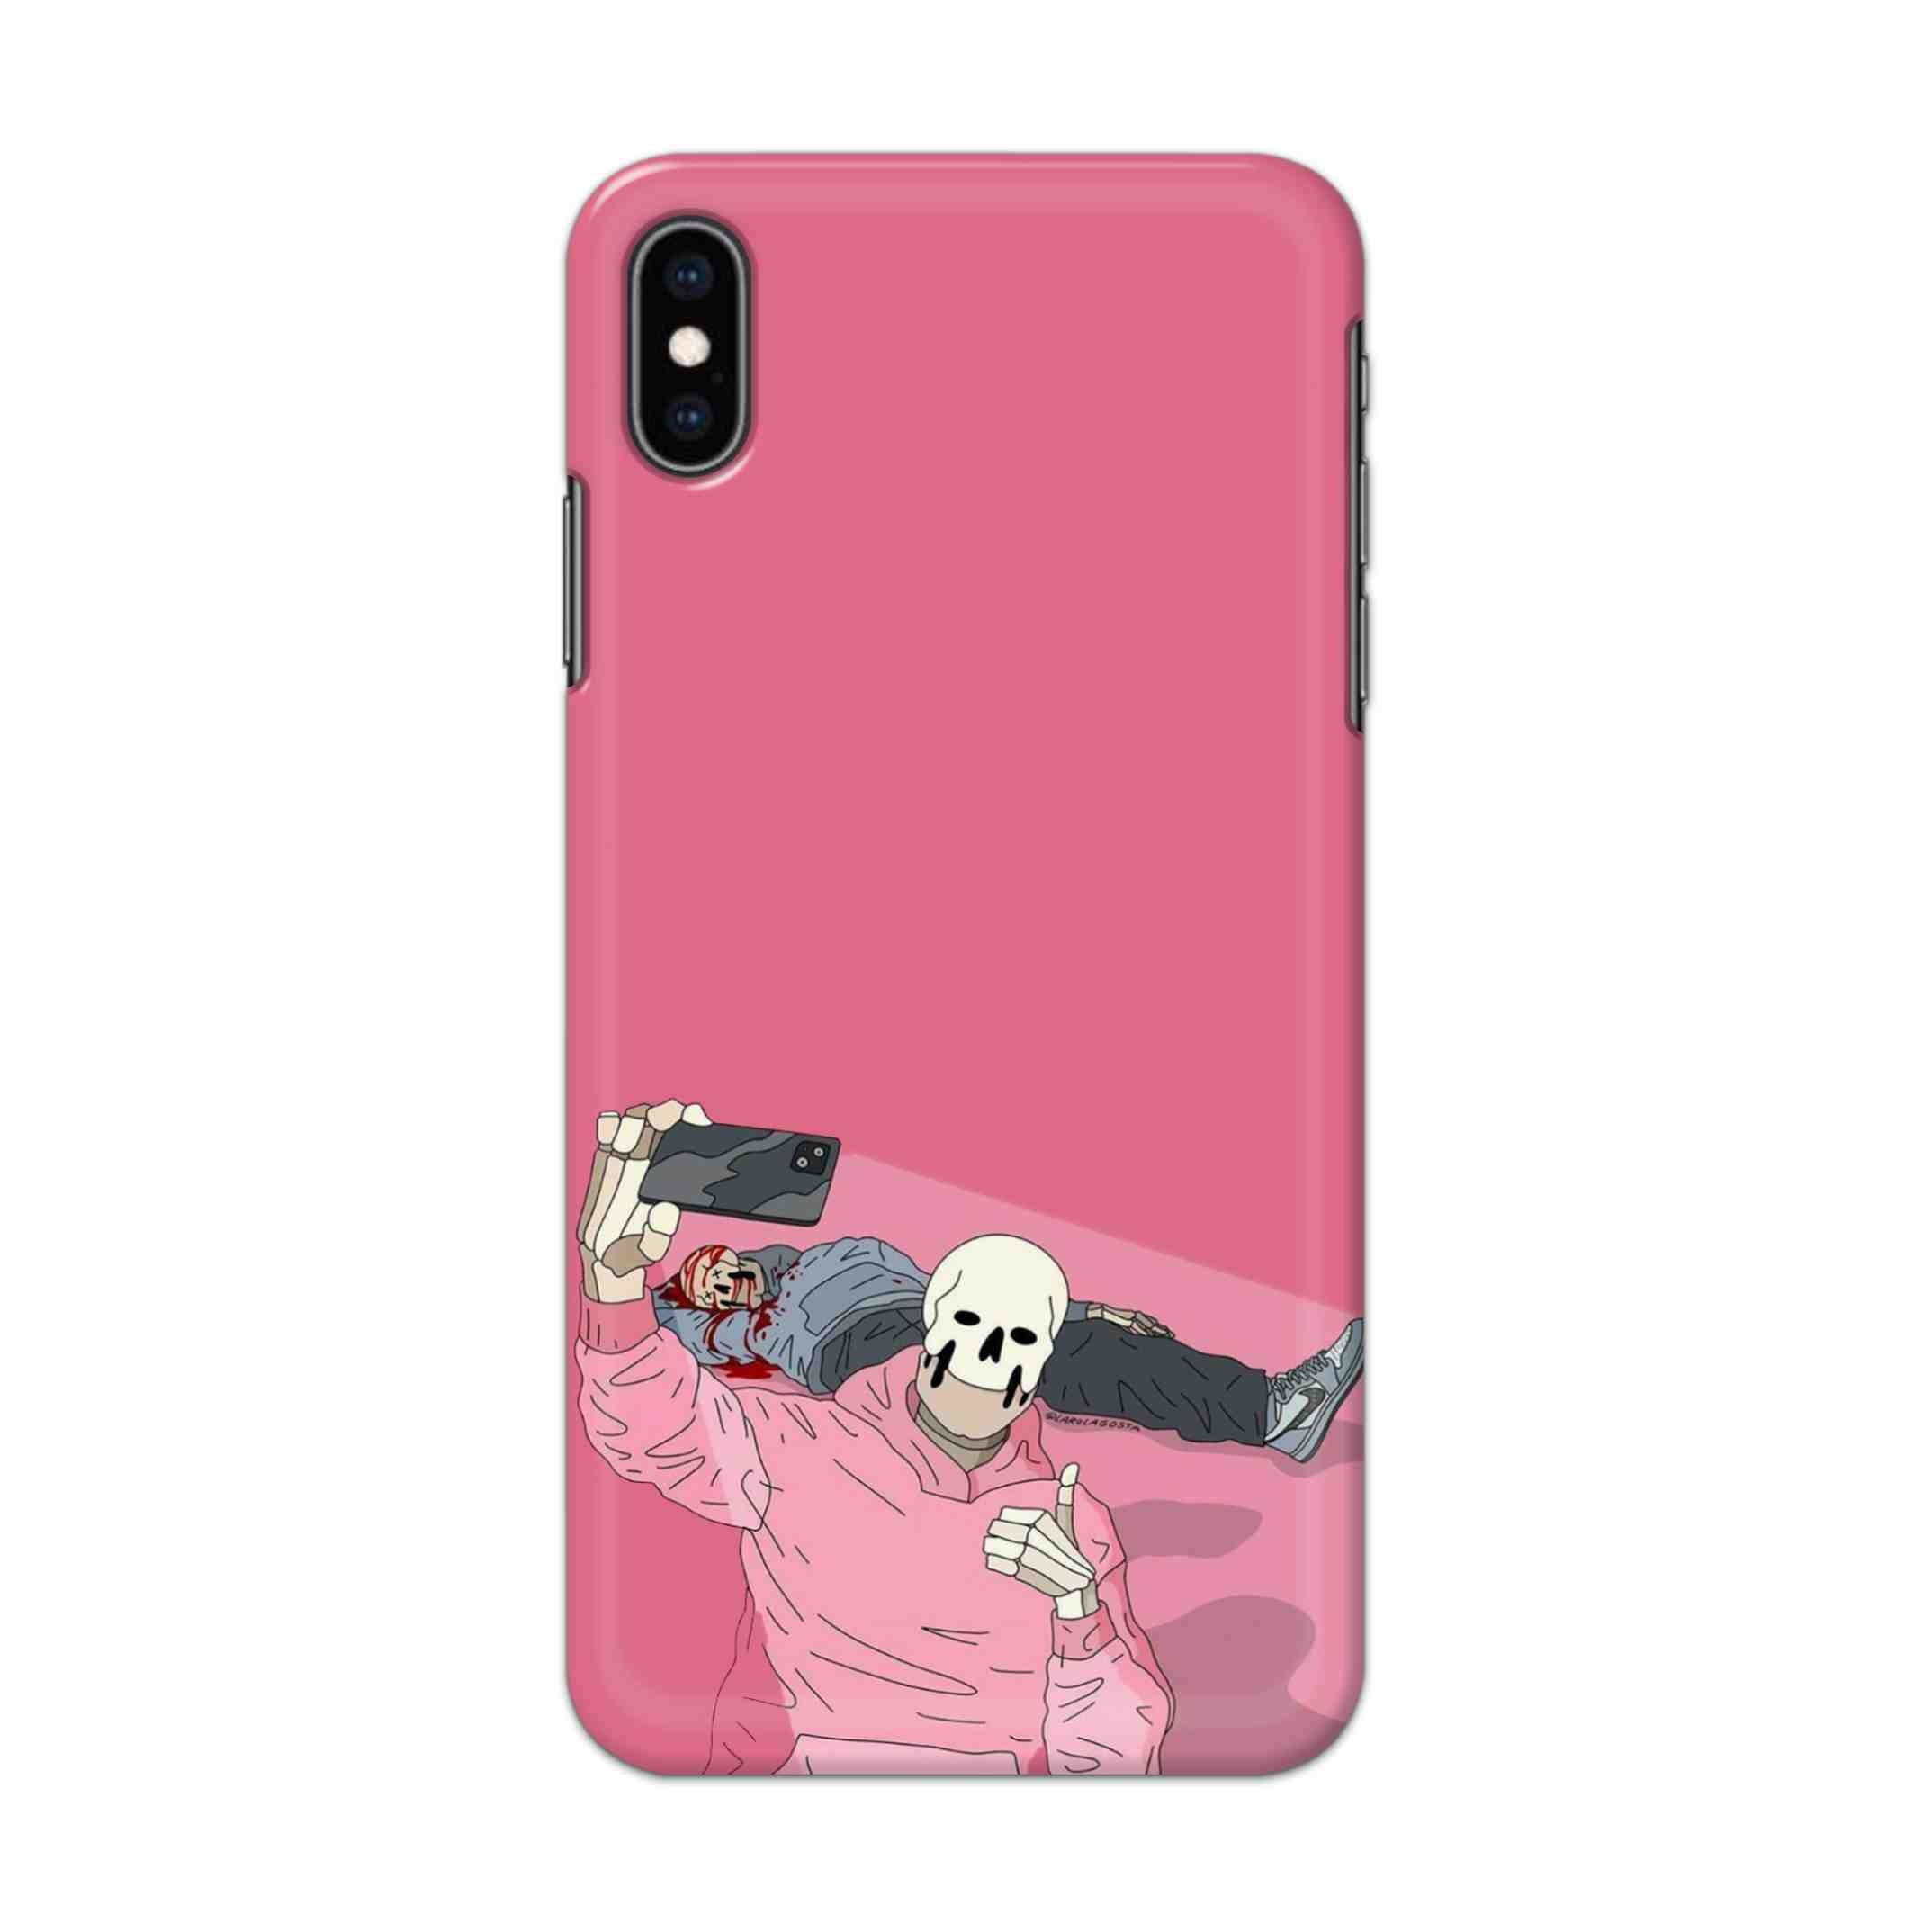 Buy Selfie Hard Back Mobile Phone Case/Cover For iPhone XS MAX Online